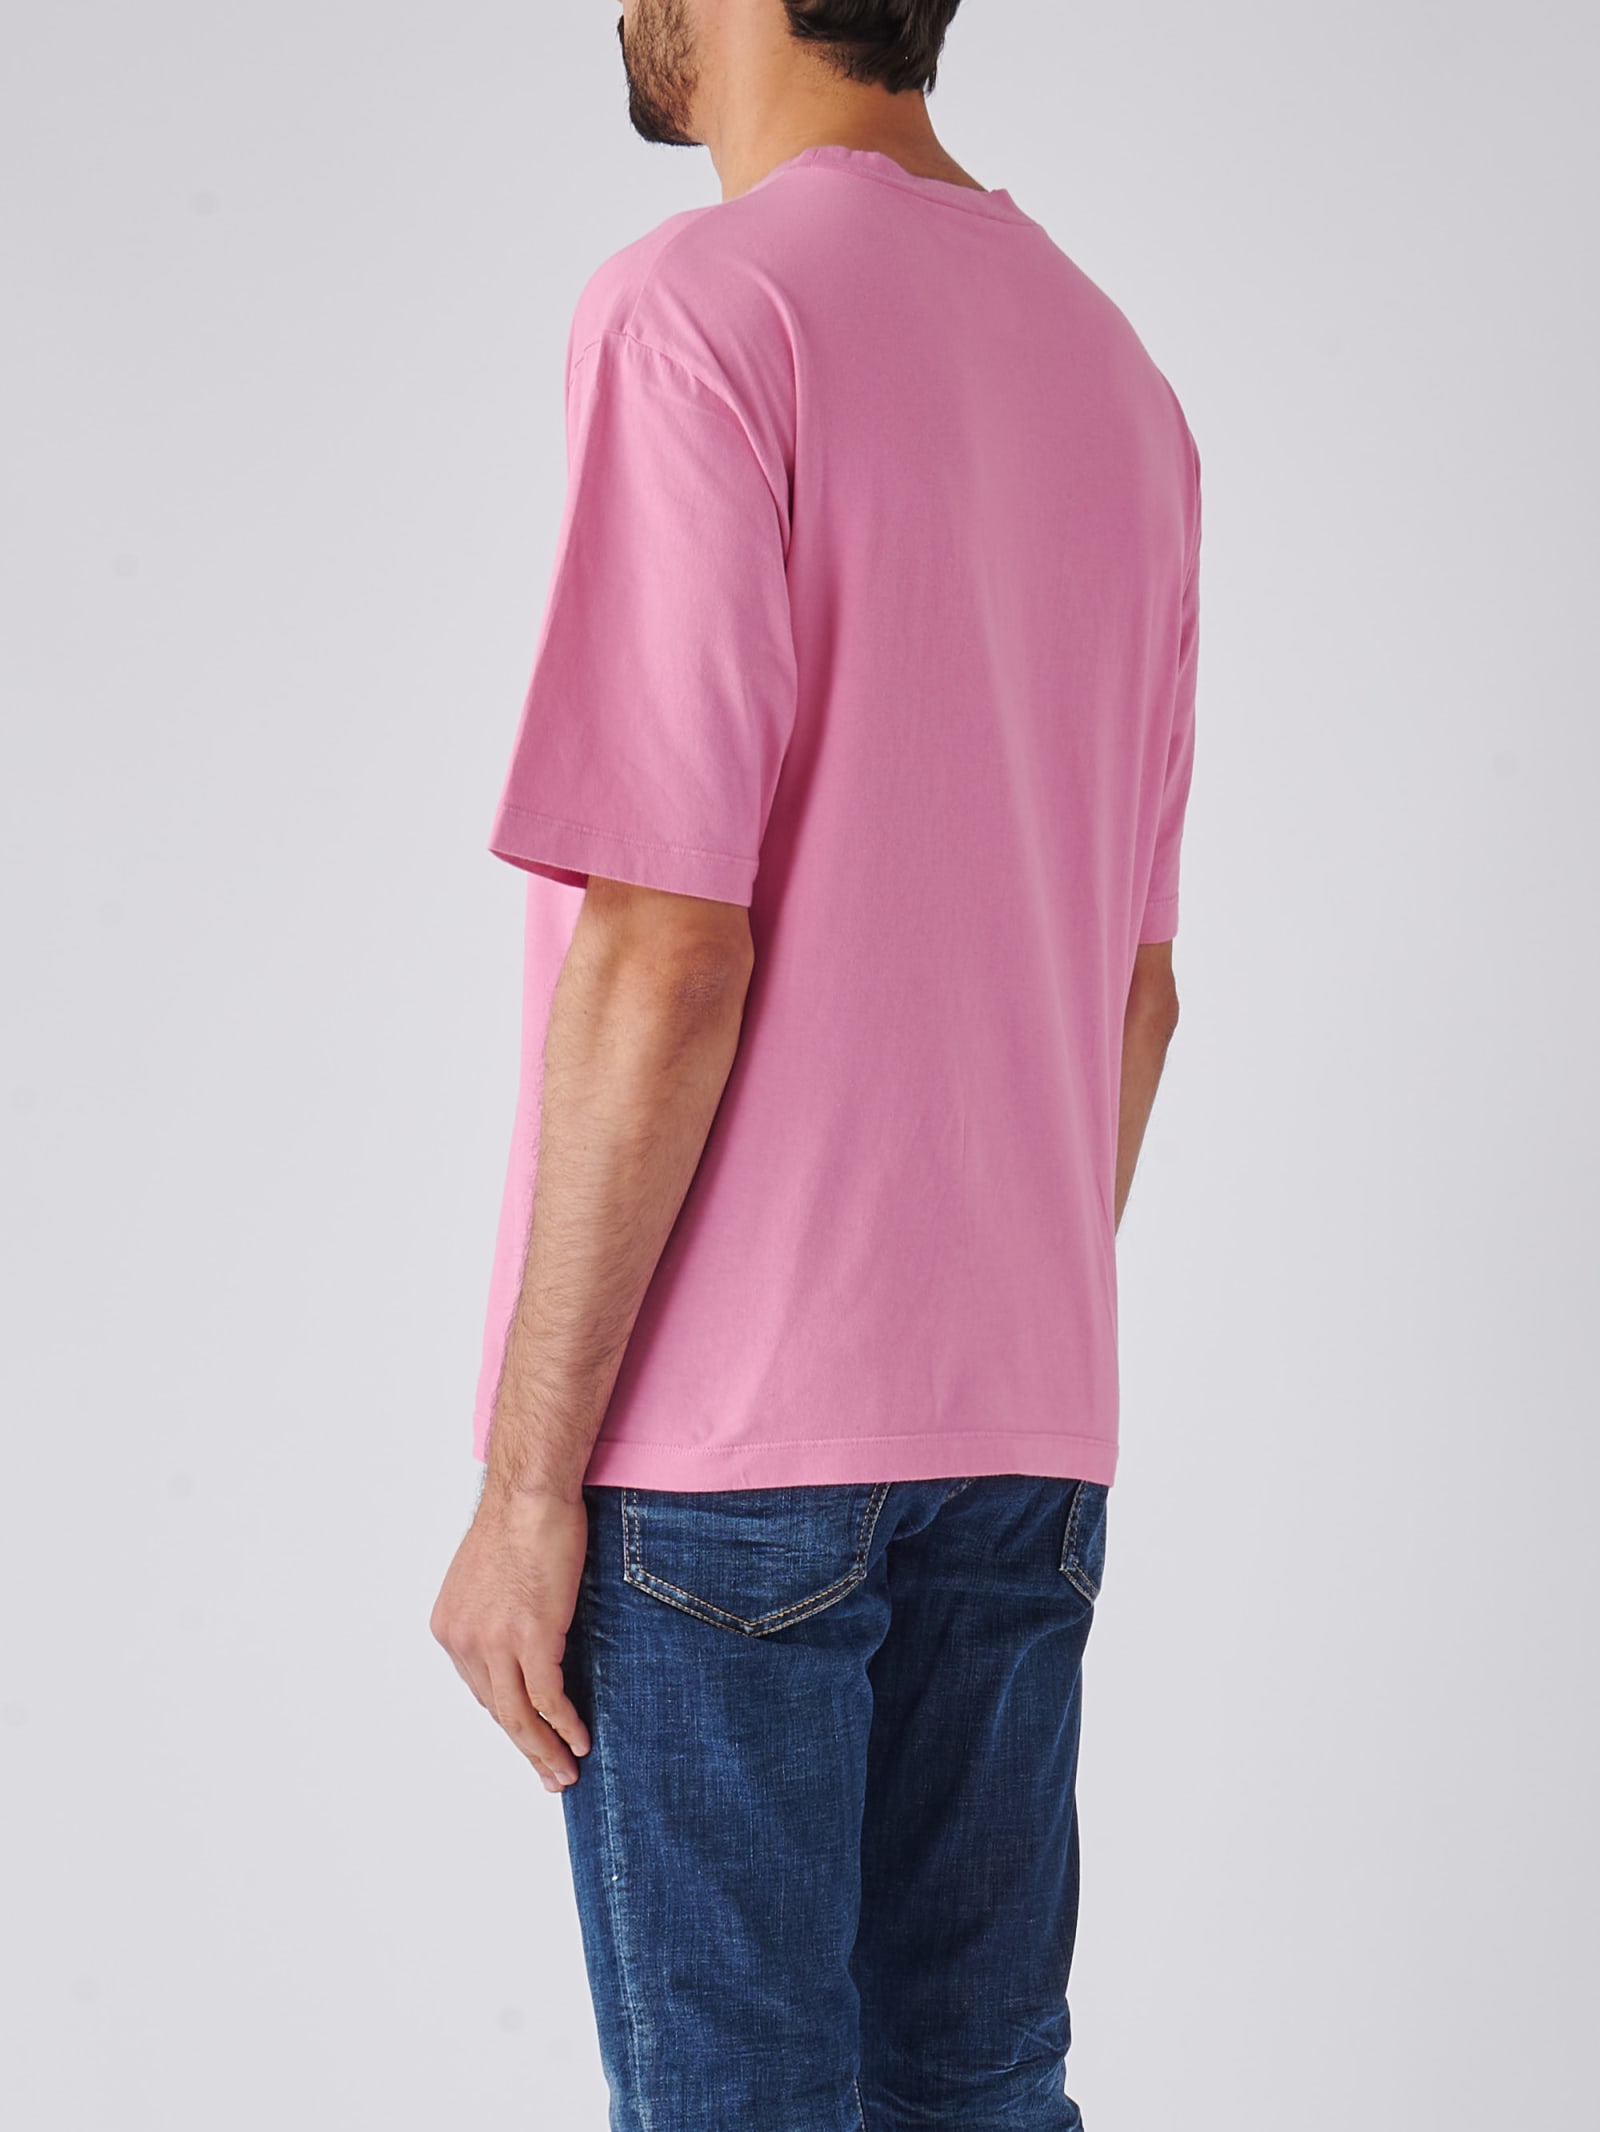 Shop Dsquared2 Loose Fit Tee T-shirt In Rosa